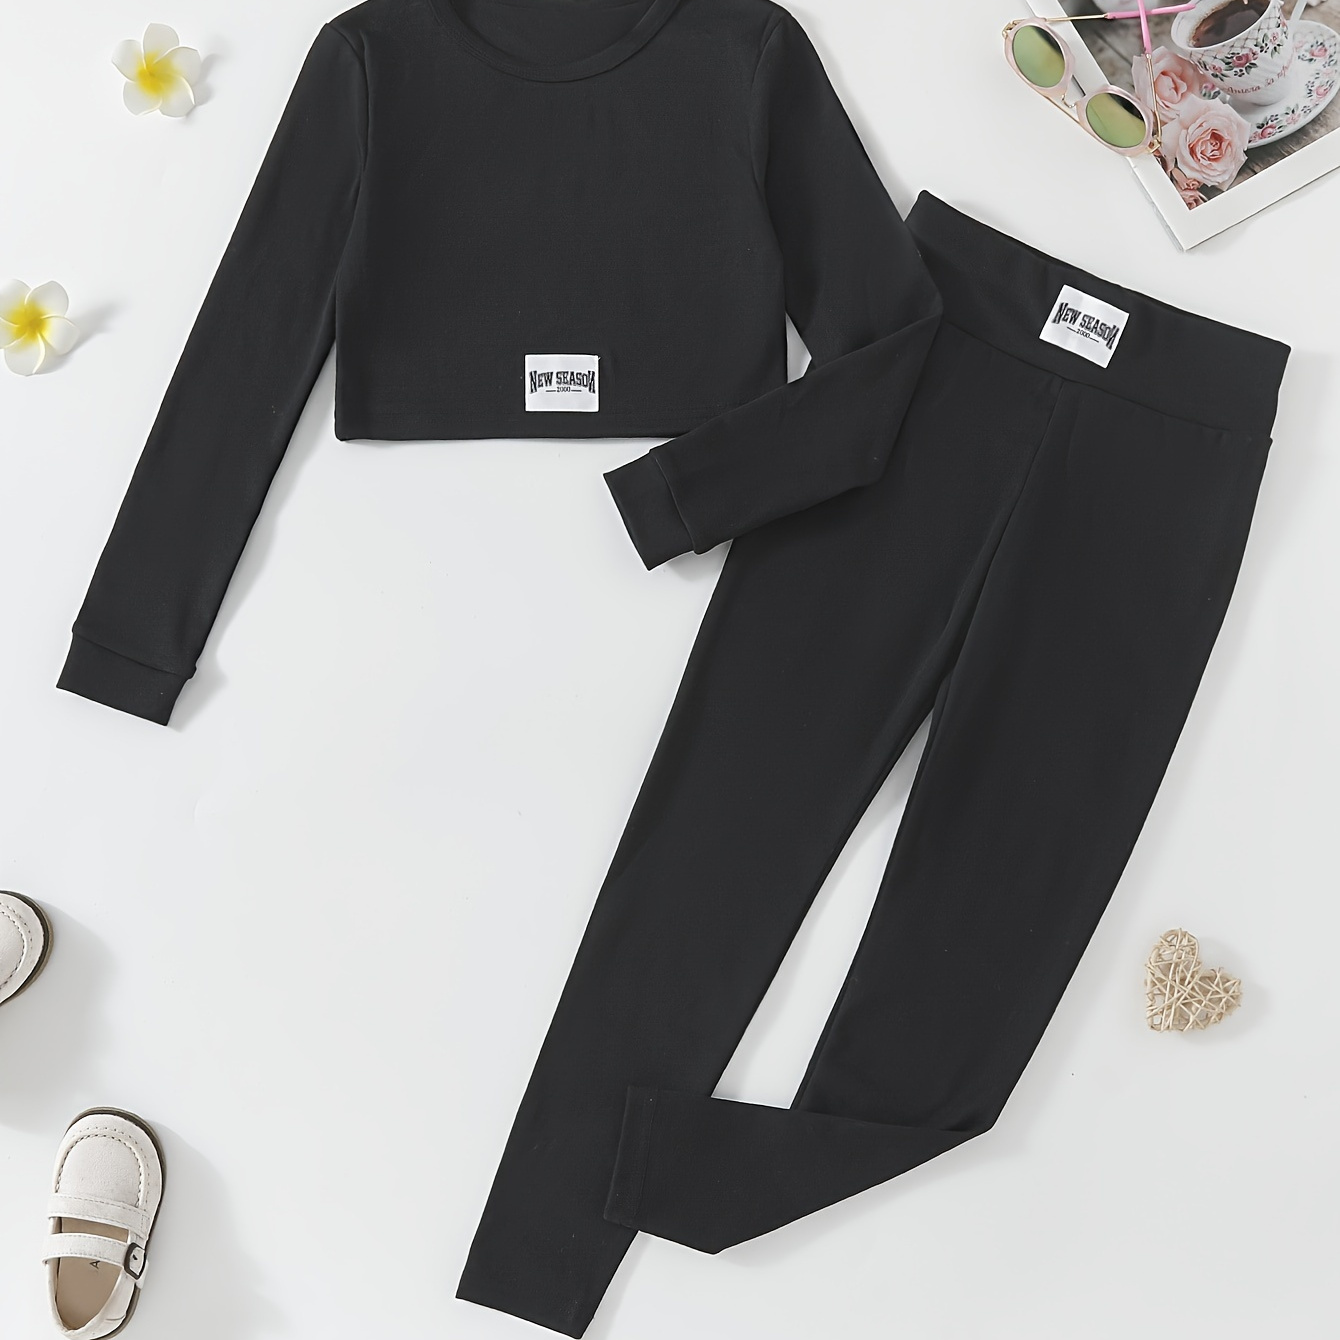 

Girl's Fashionable Black Long Sleeve Sports Suit Set For Spring/summer, Comfort Fit, Casual Athletic Wear